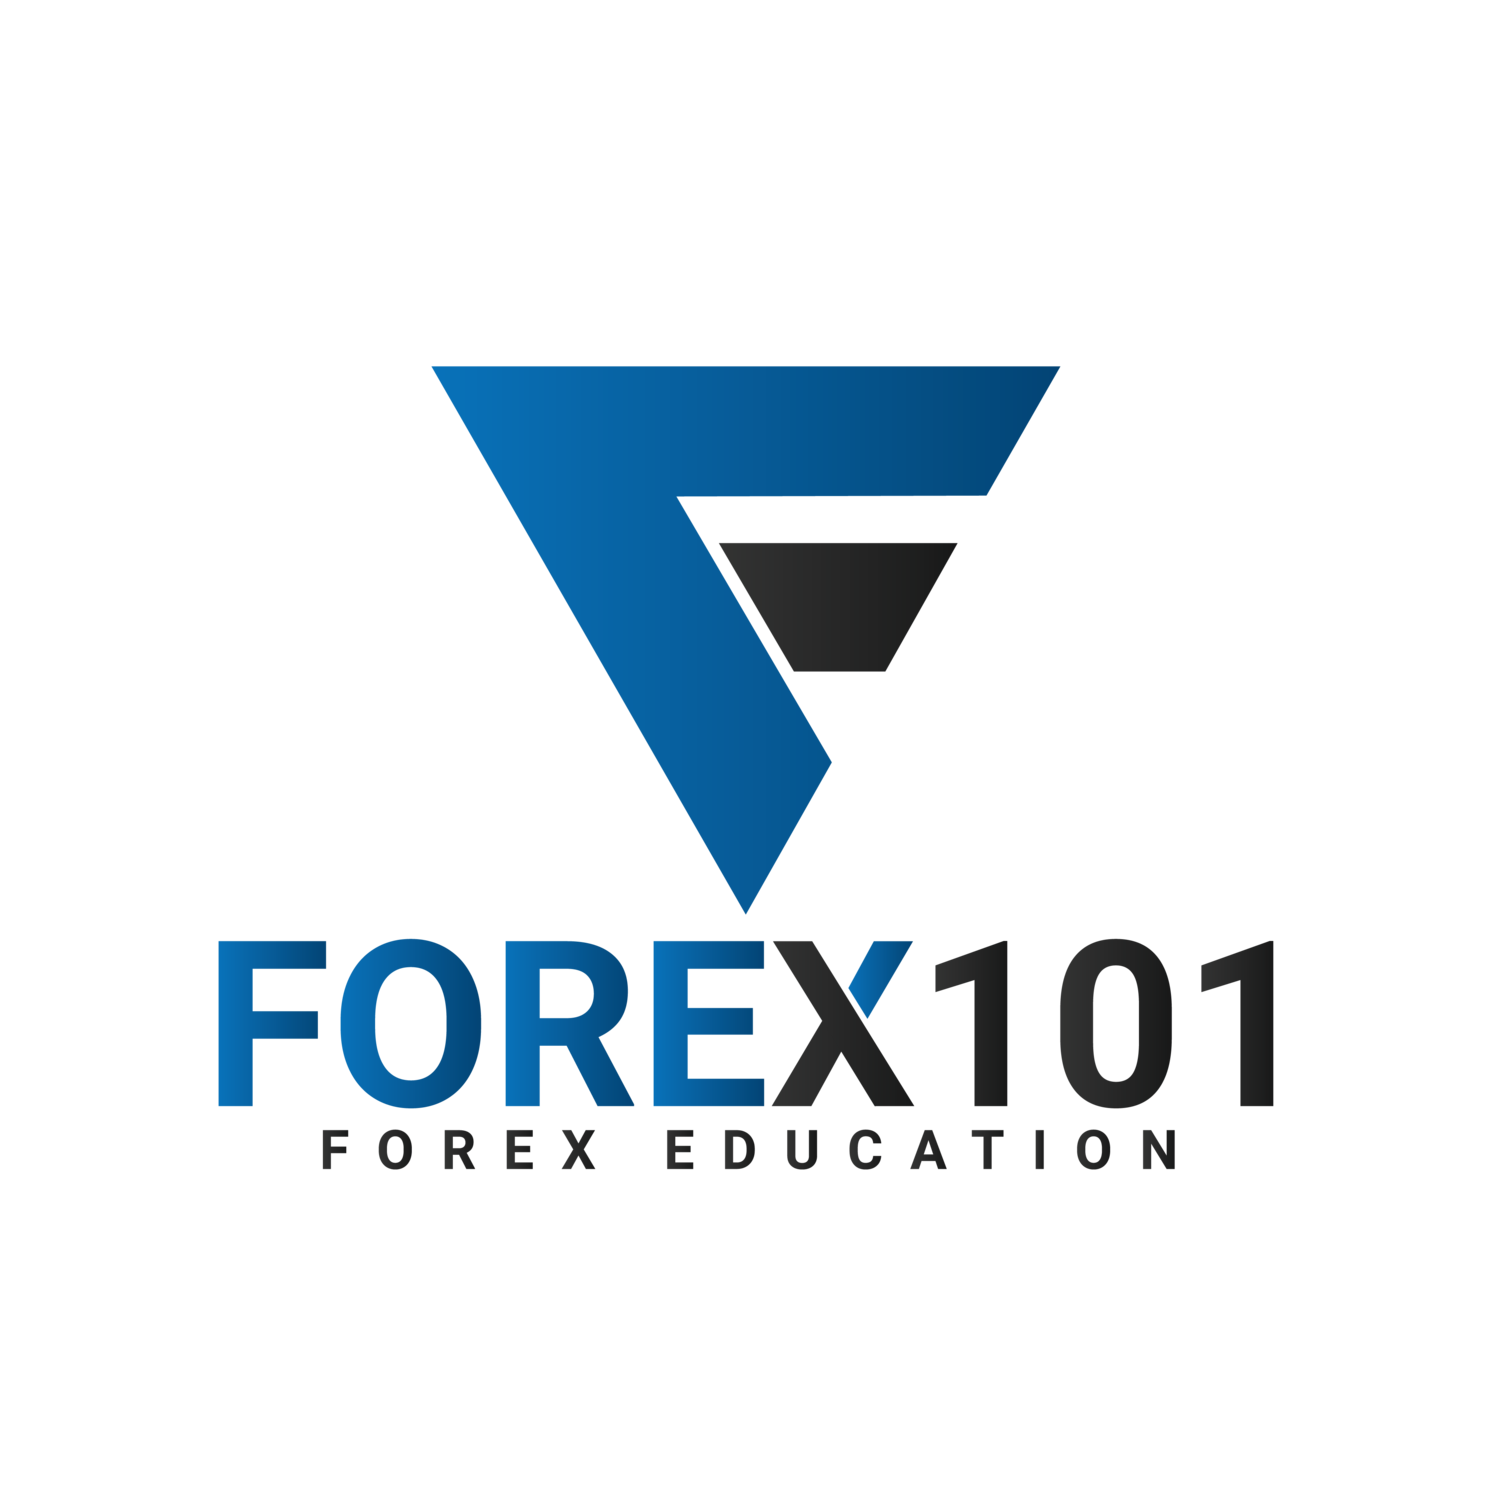 Forex101 Coupons & Promo codes